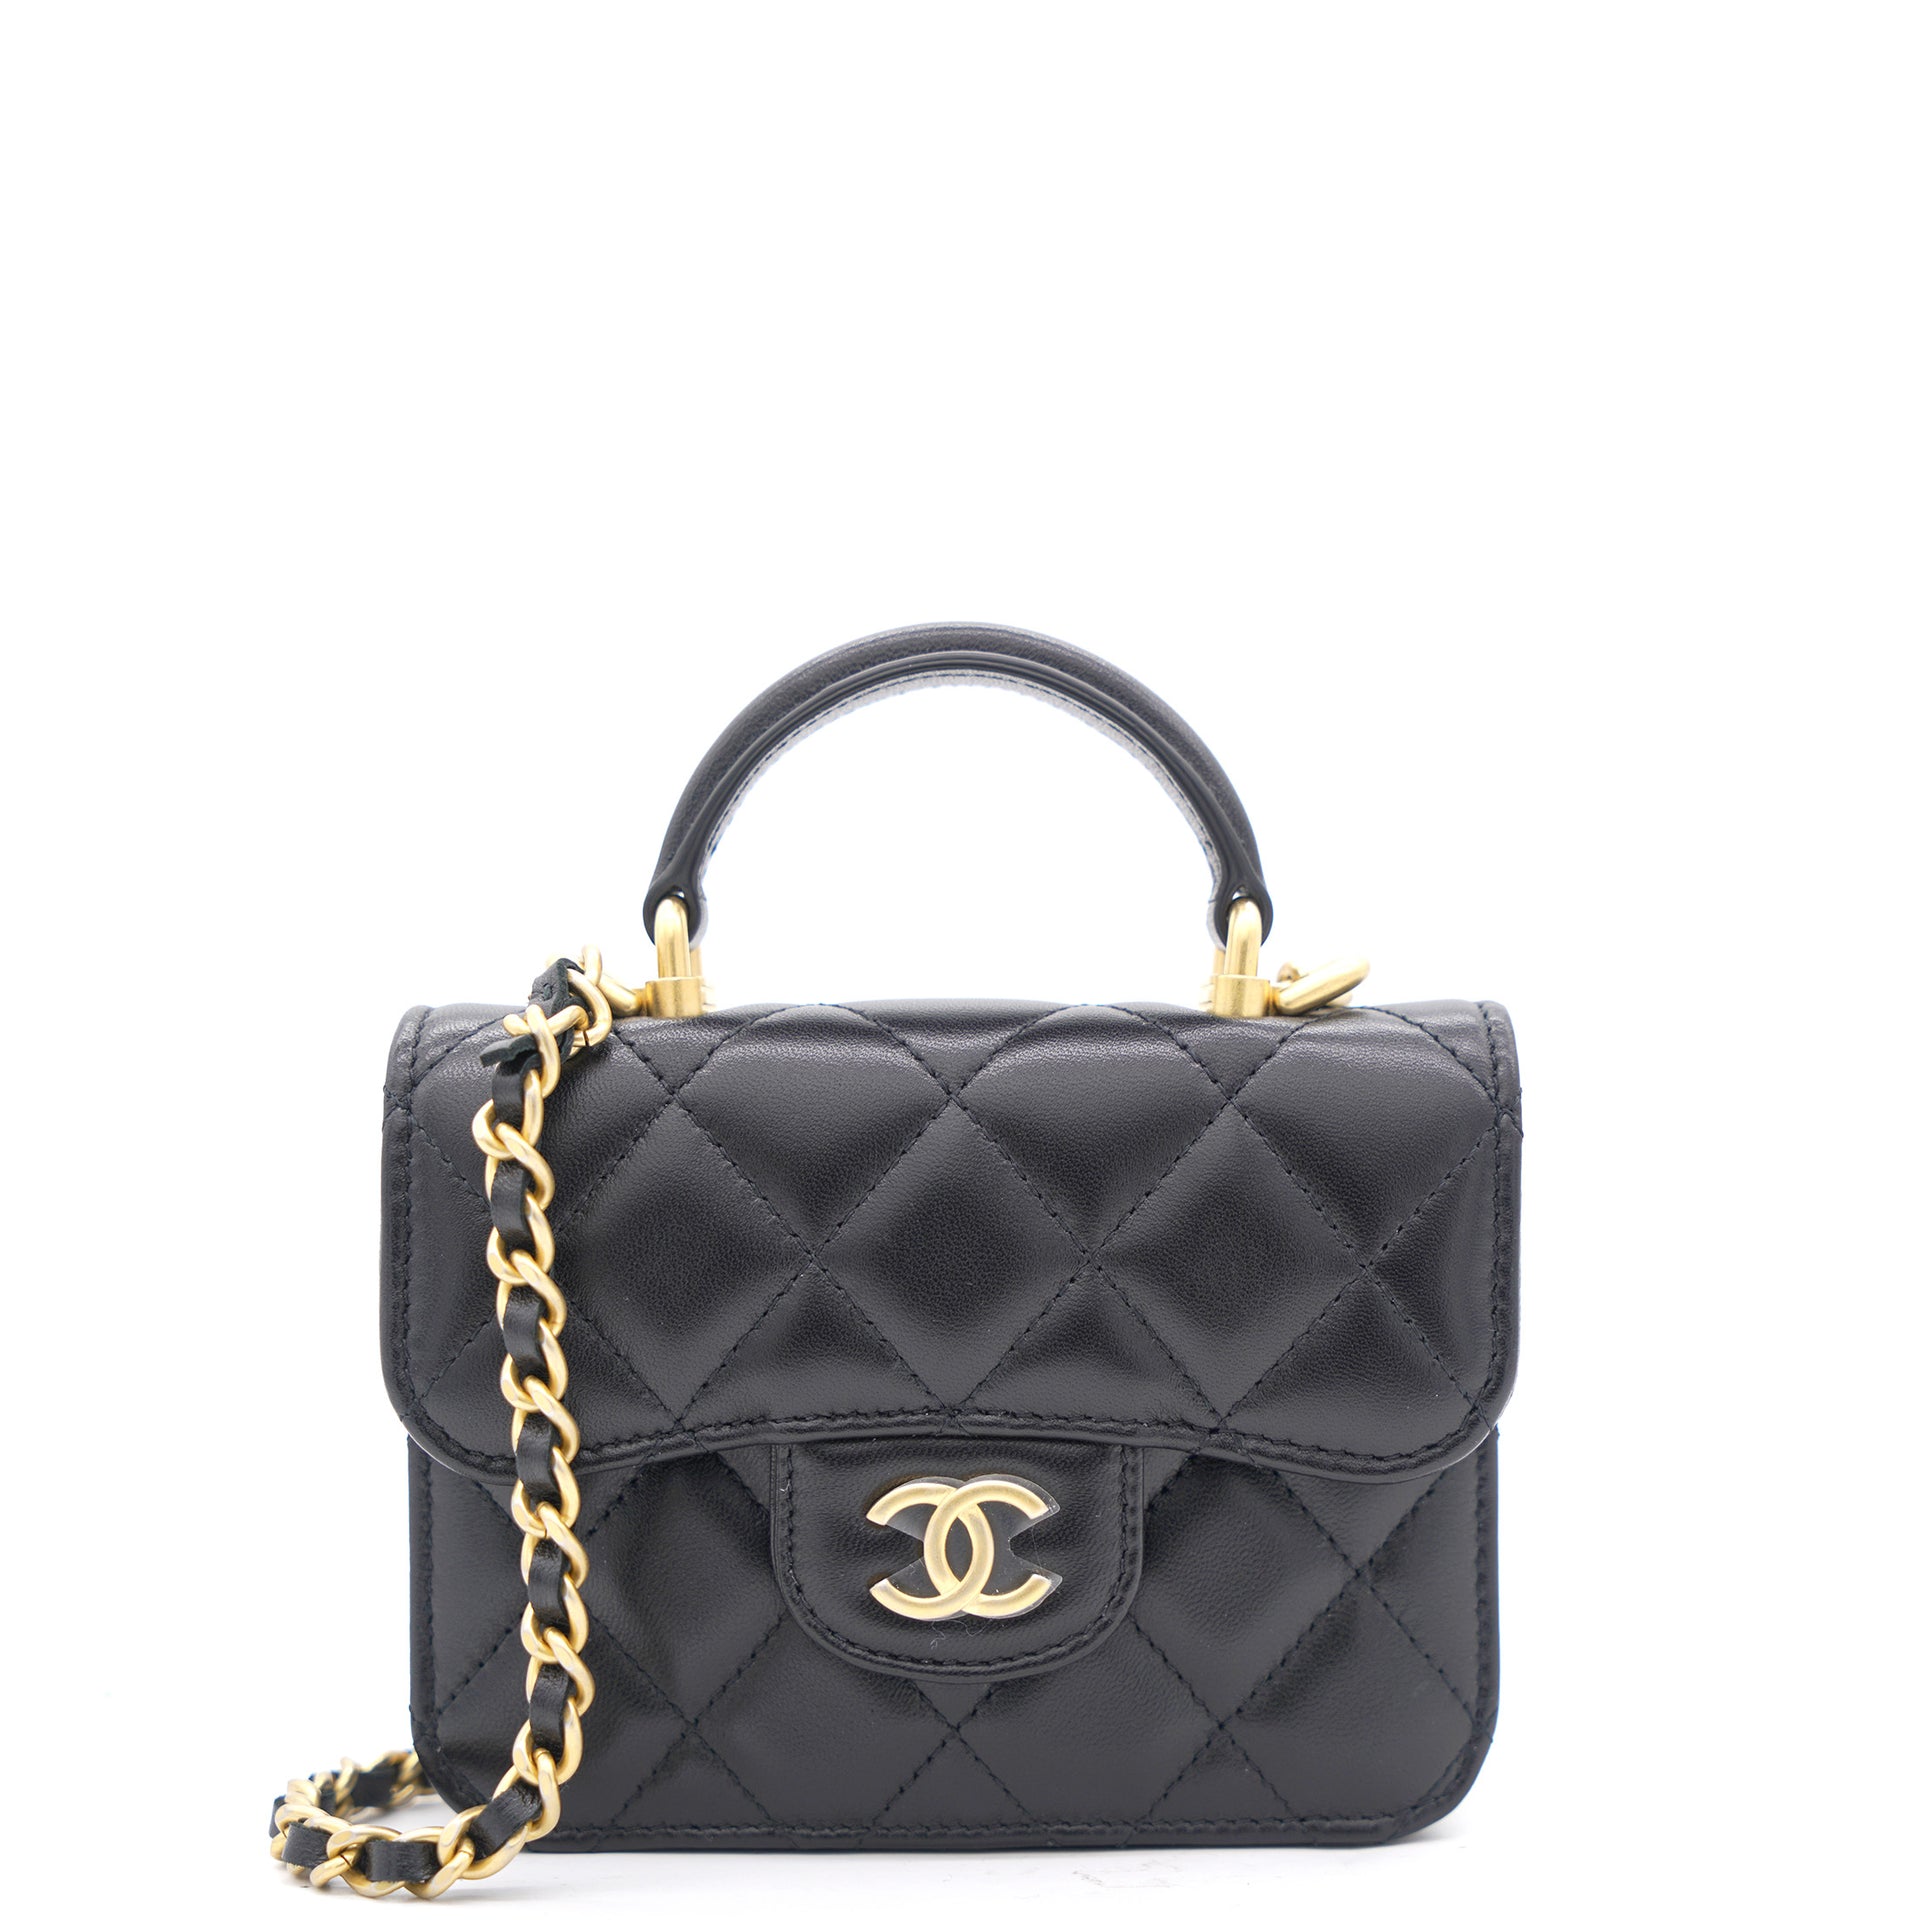 Chanel Black Quilted Leather Nano Top Handle Square Classic Flap